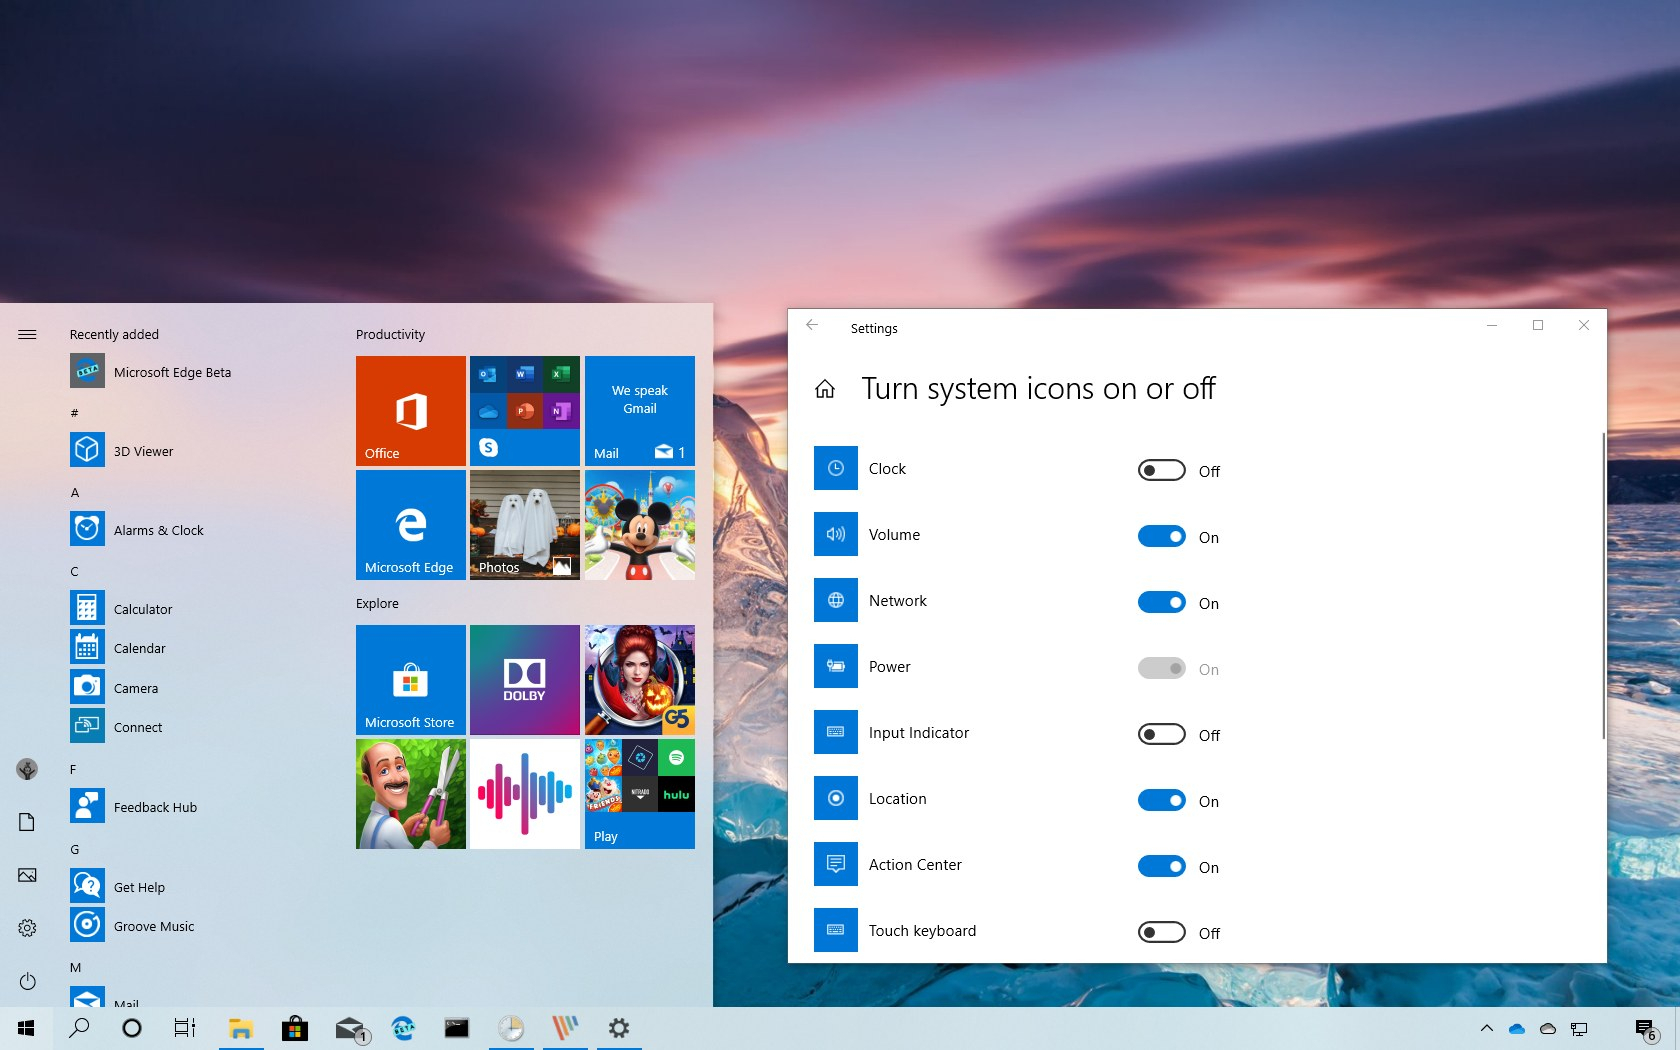 How To Add Or Remove Icons From Taskbar Notification Area On with Add Google Calendar To Taskbar Windows 10